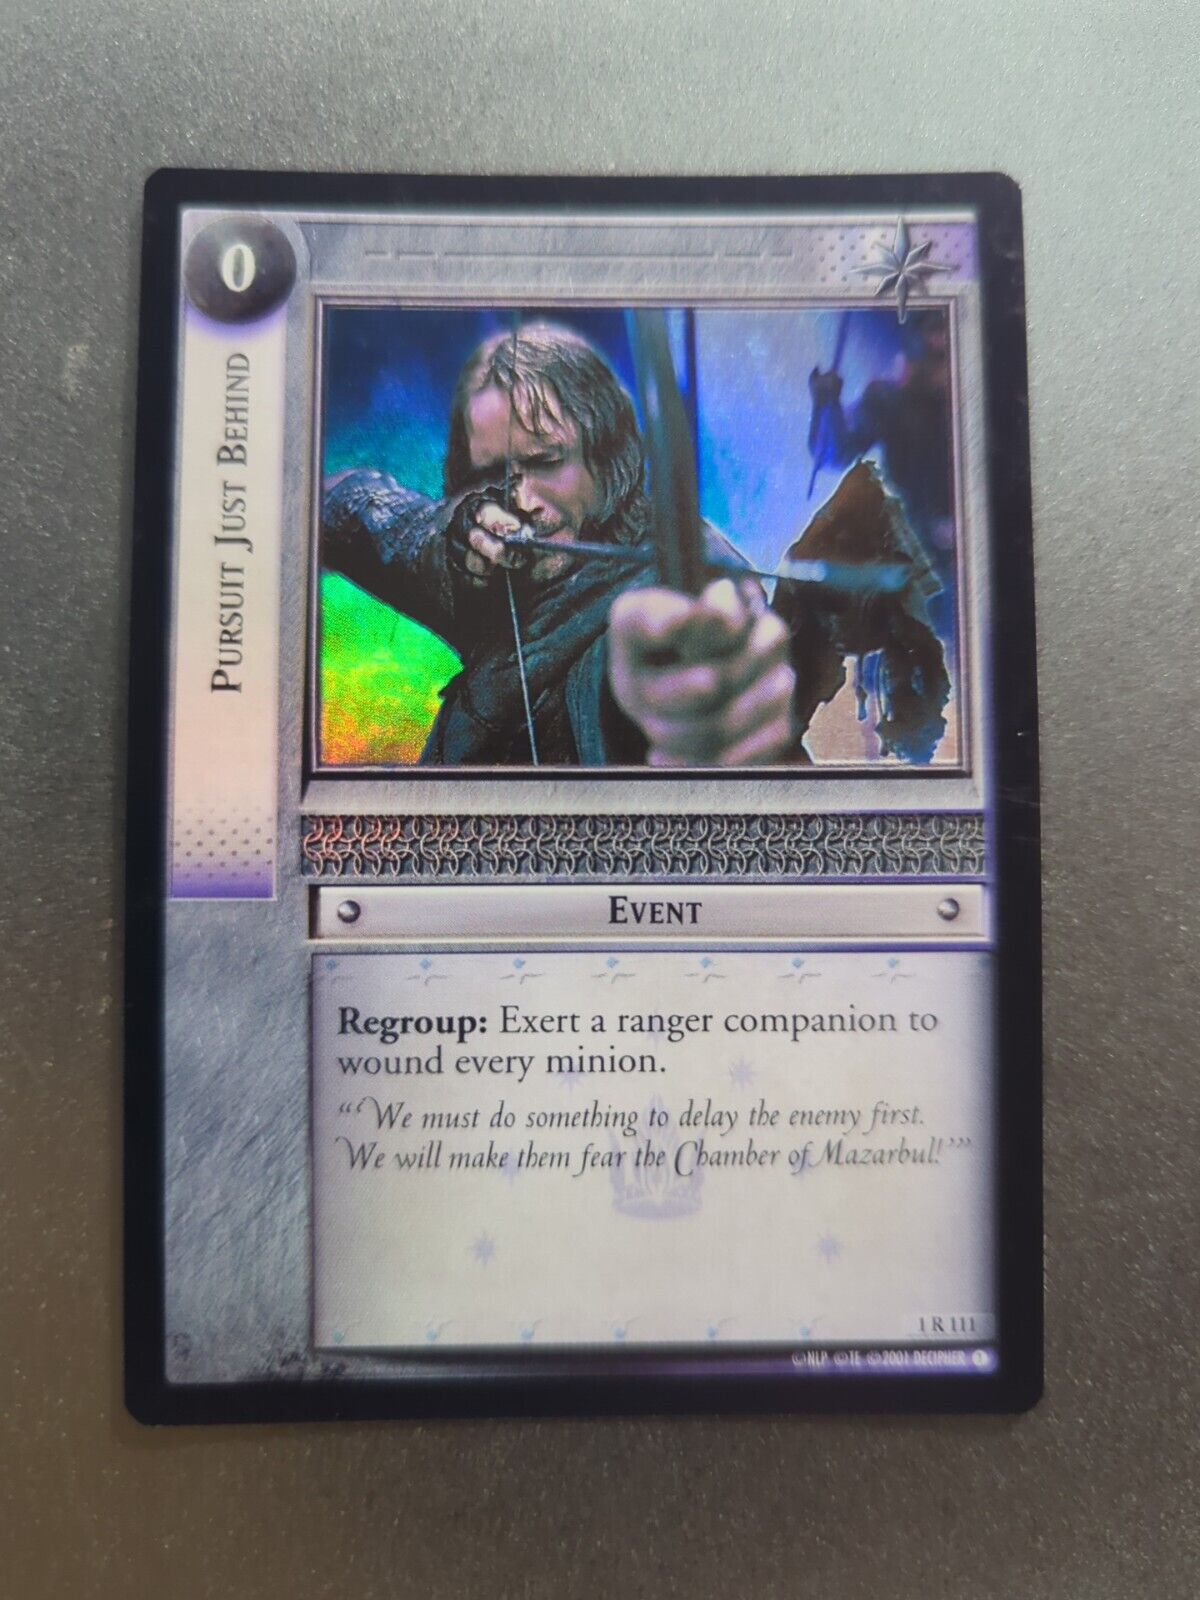 Pursuit Just Behind LOTR TCG Foil Fellowship Of The Ring 1R111